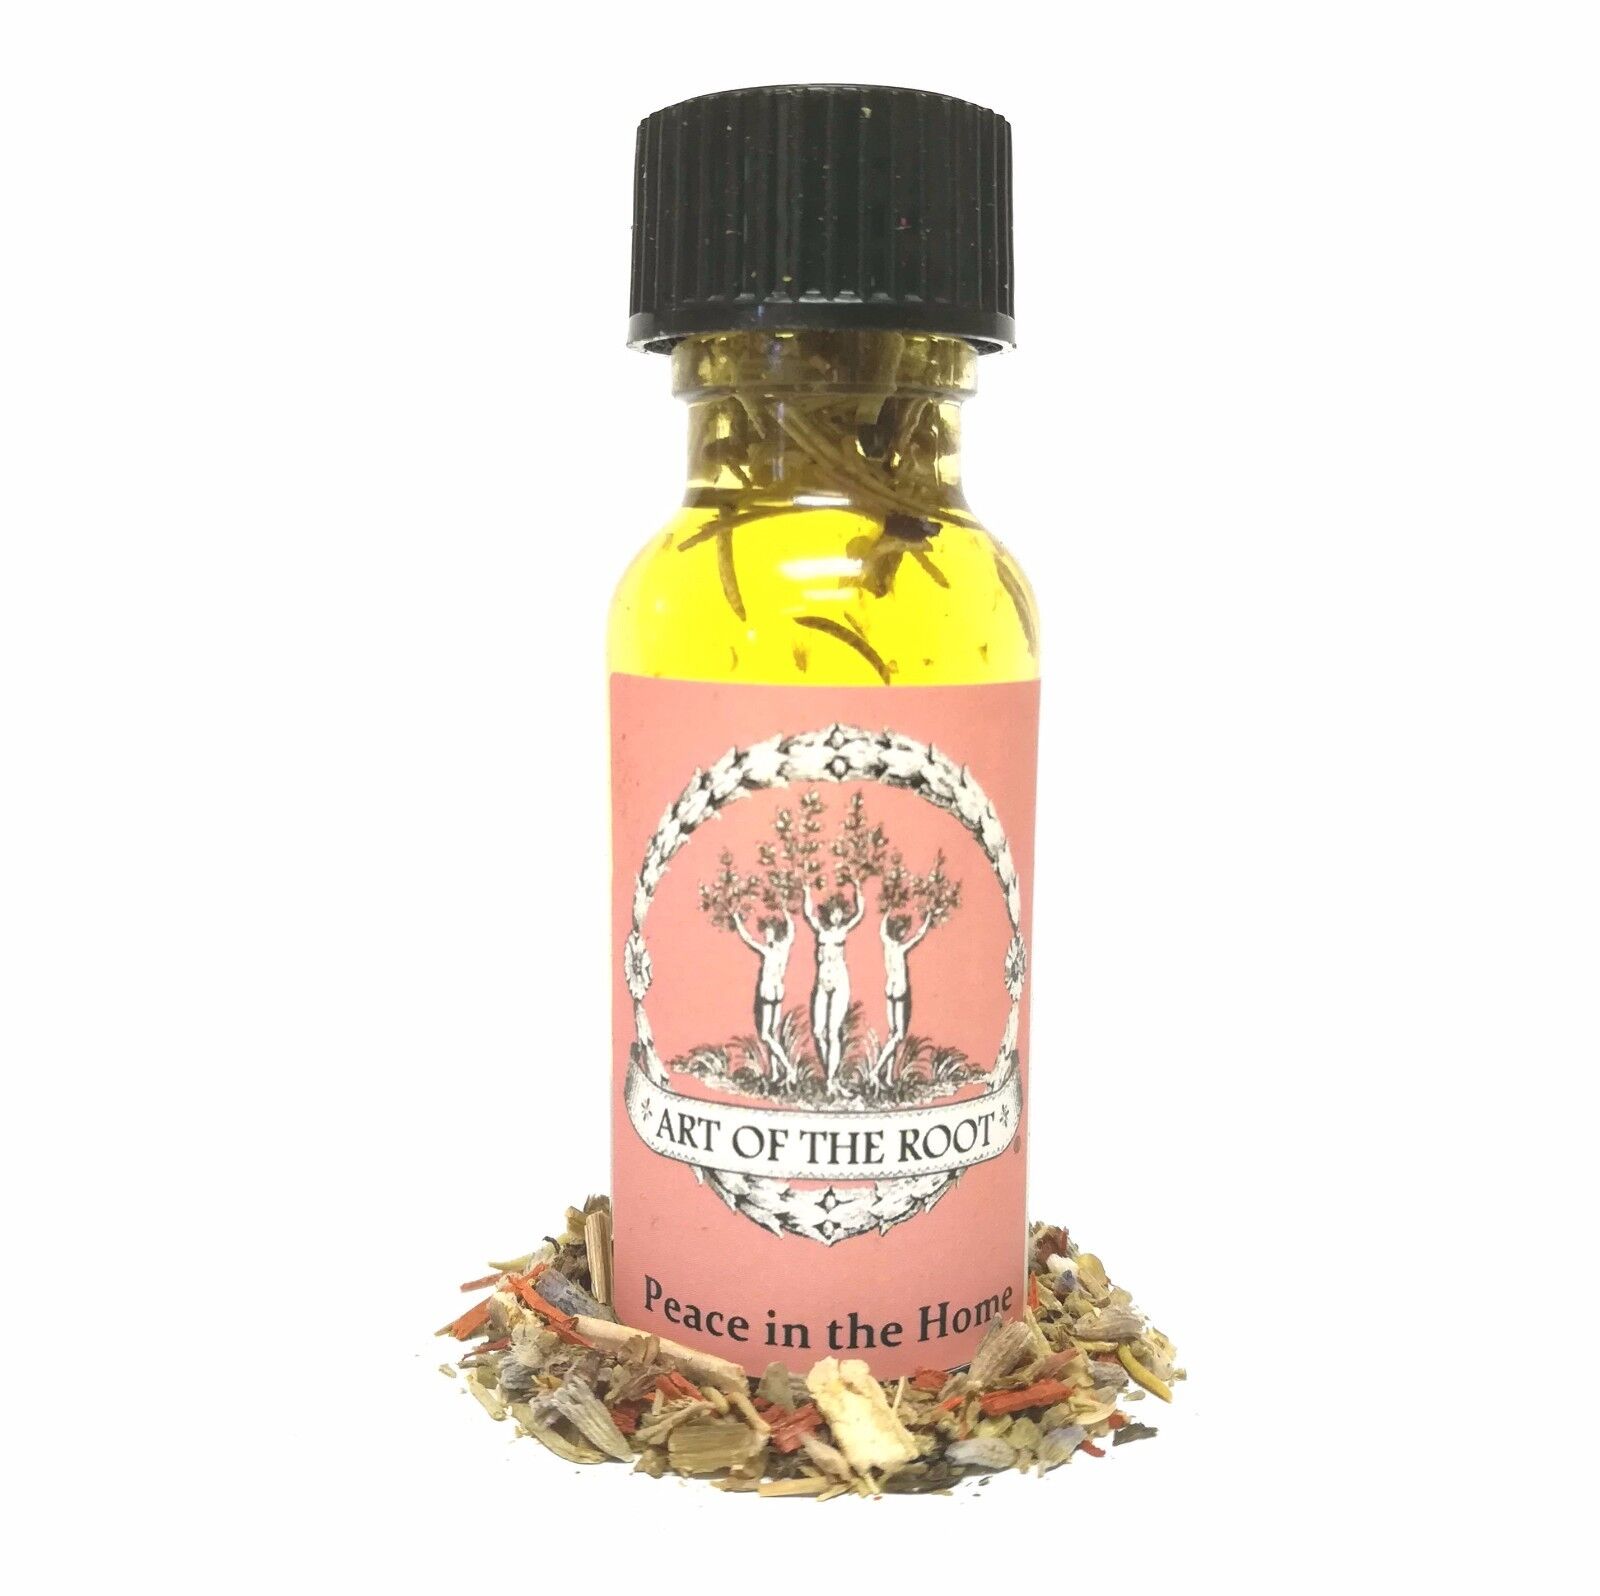 Peace in the Home Oil for Peace, Serenity, Harmony: Hoodoo Voodoo Wicca & Pagan